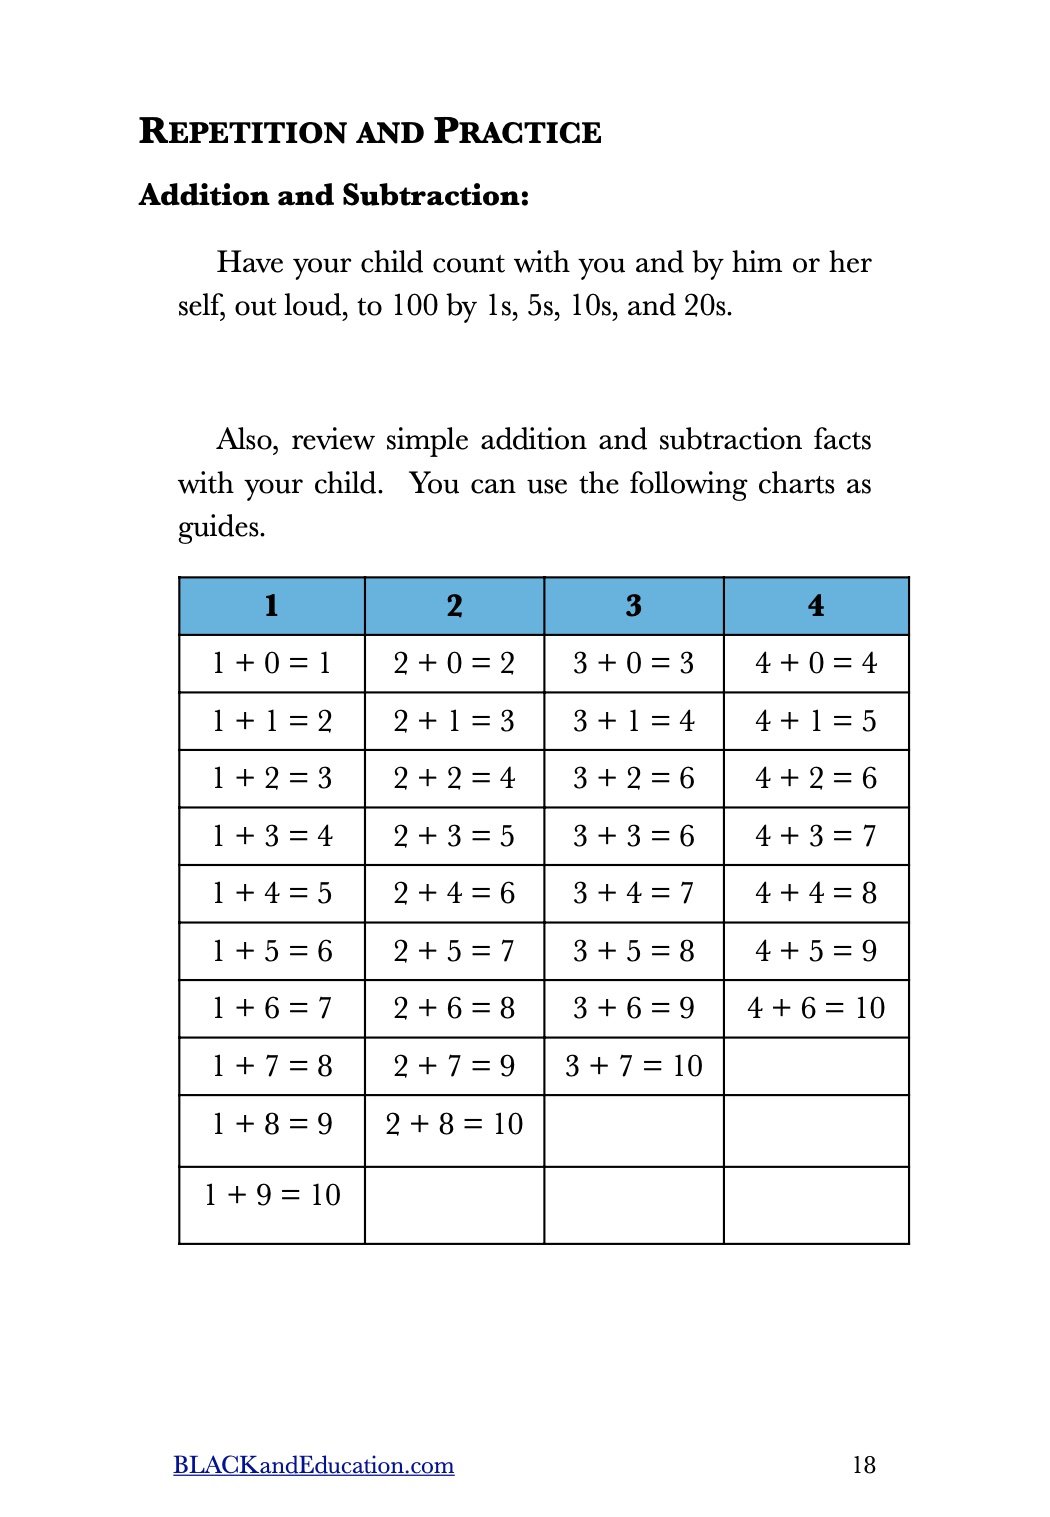 1st grade repetition and practice addition.jpg